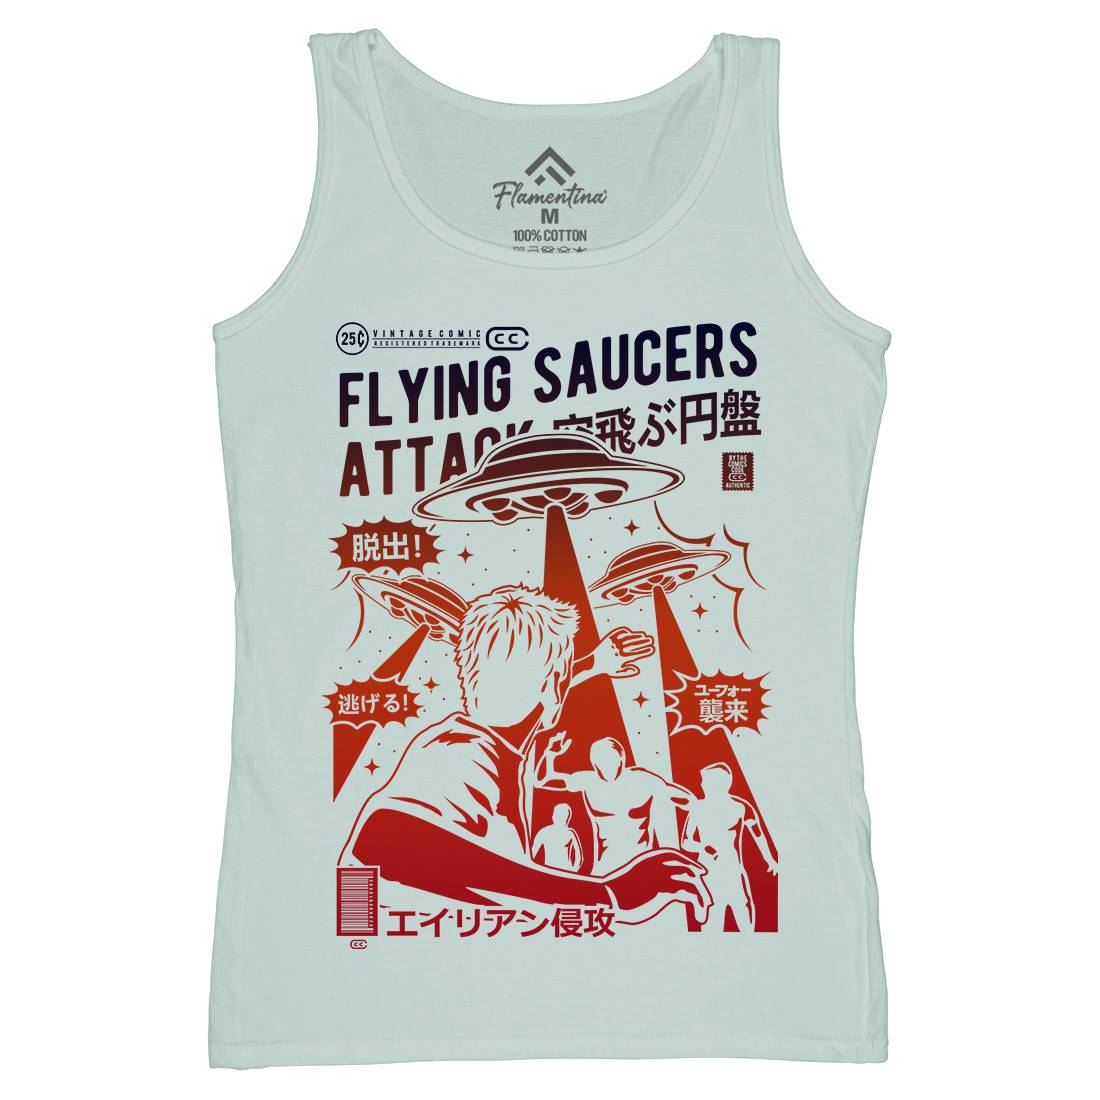 Flying Saucers Womens Organic Tank Top Vest Space A230